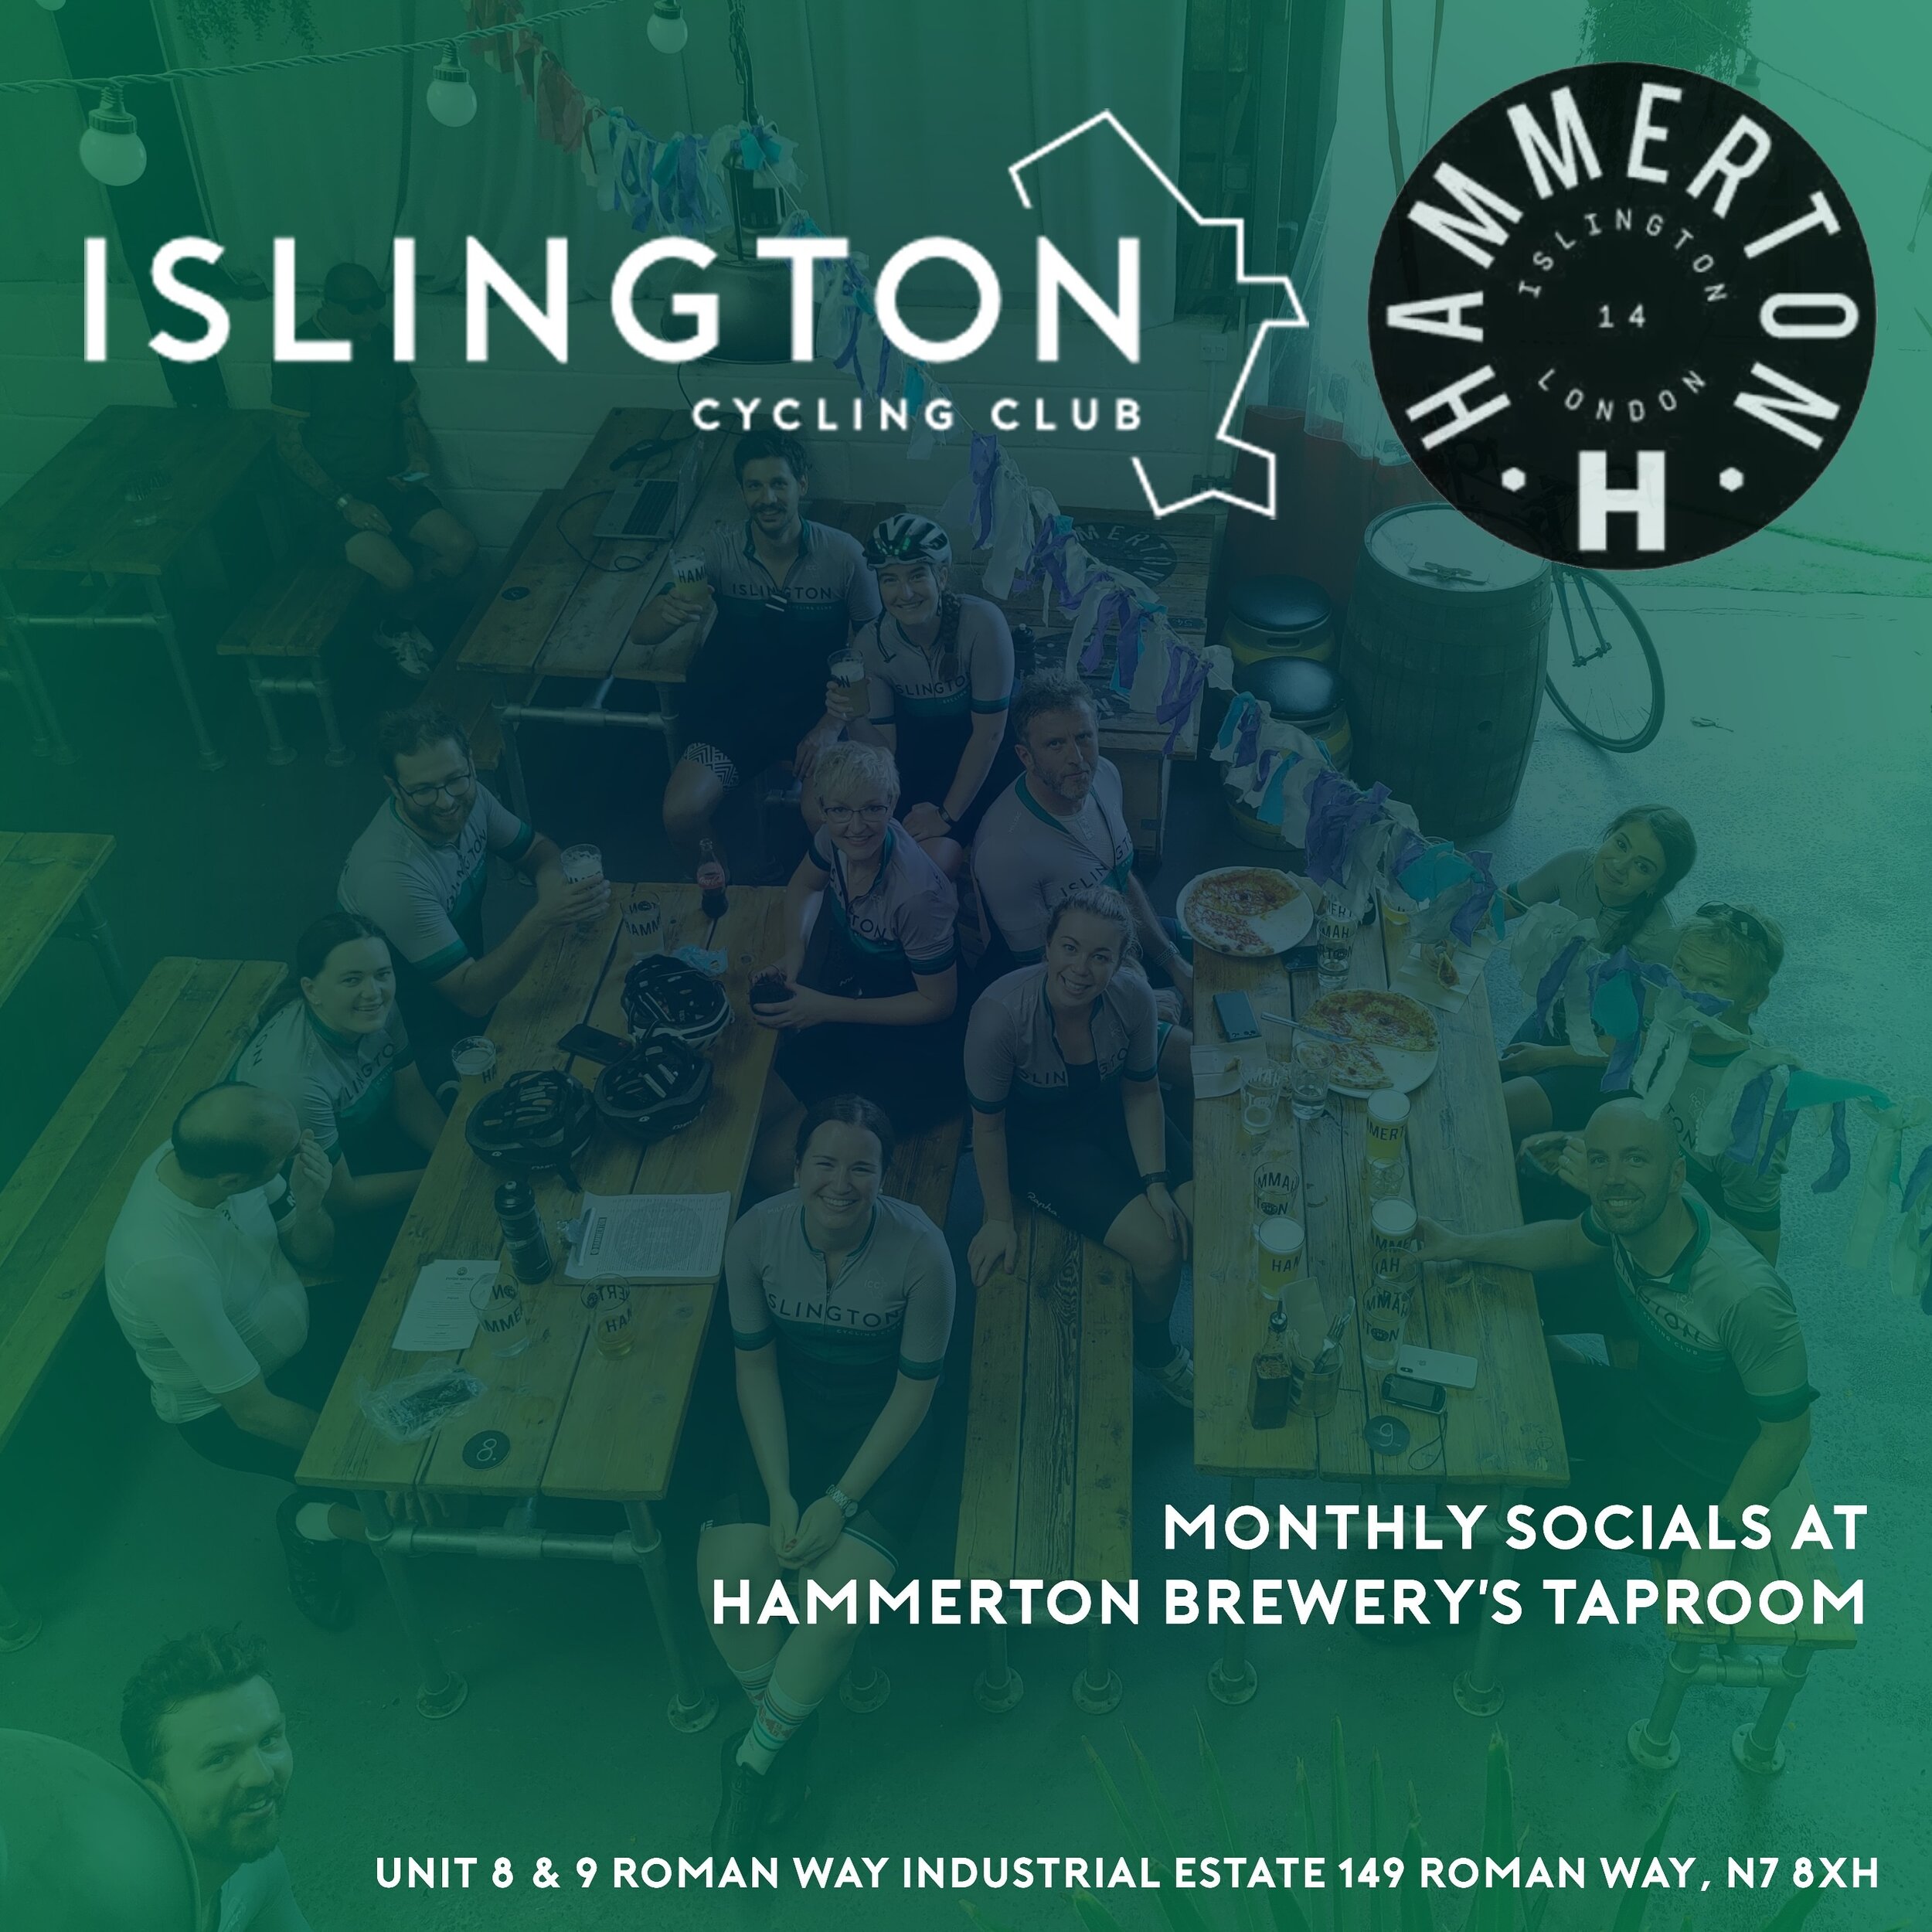 We&rsquo;ve partnered up with Hammerton Brewery for our next ICC Social on 22nd March!

Join us from 18:00 this Friday at the Hammerton Taproom